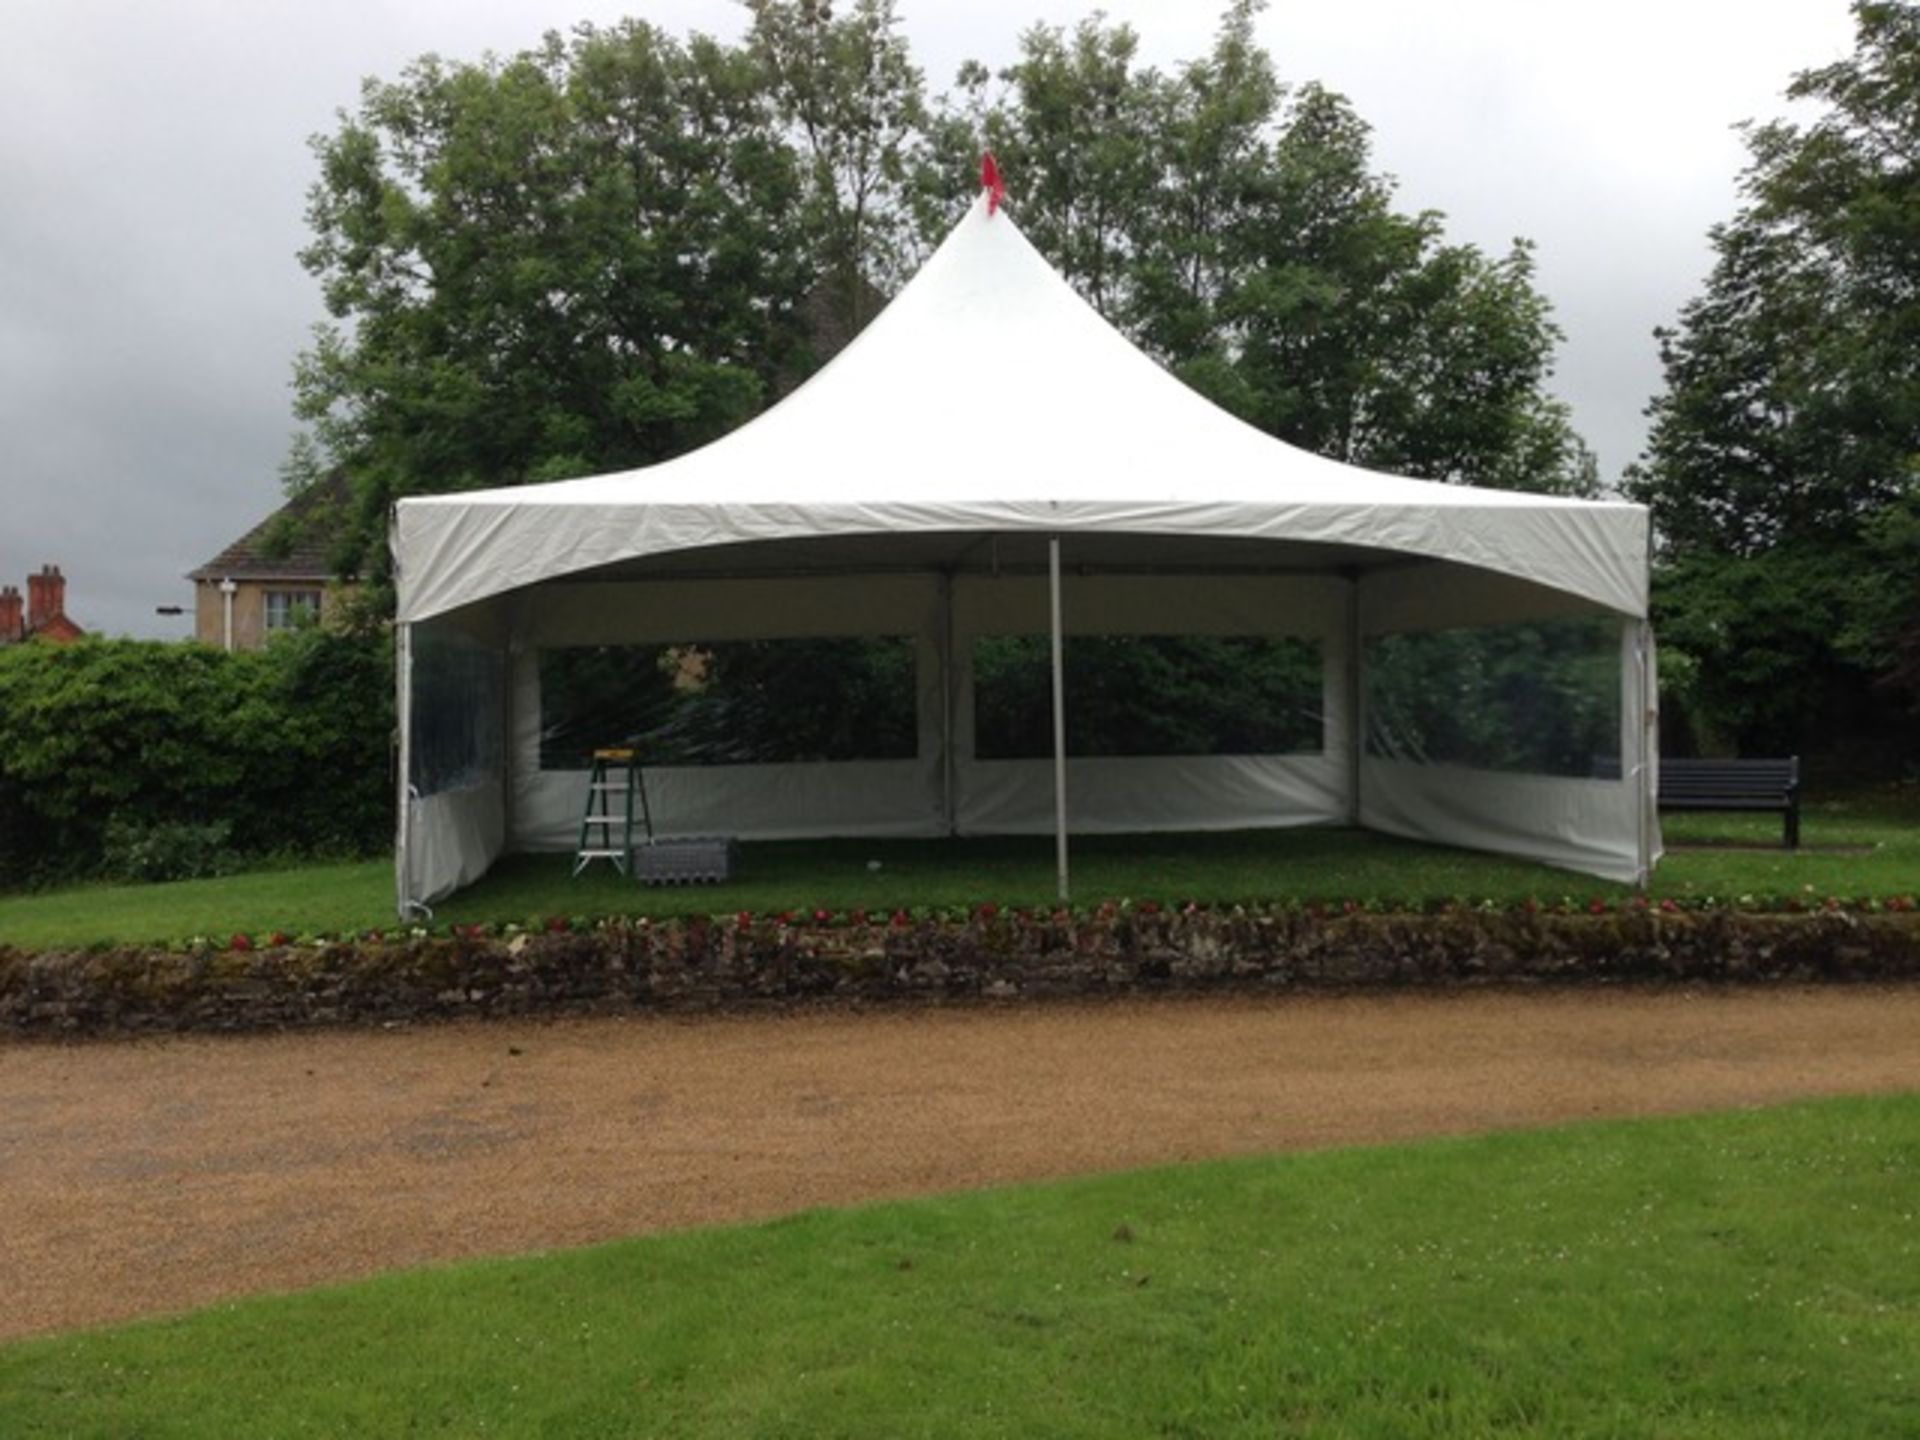 2 Tentnology 20ft square marquee canopies with 1 set of stakes, one set of poles and one fittings